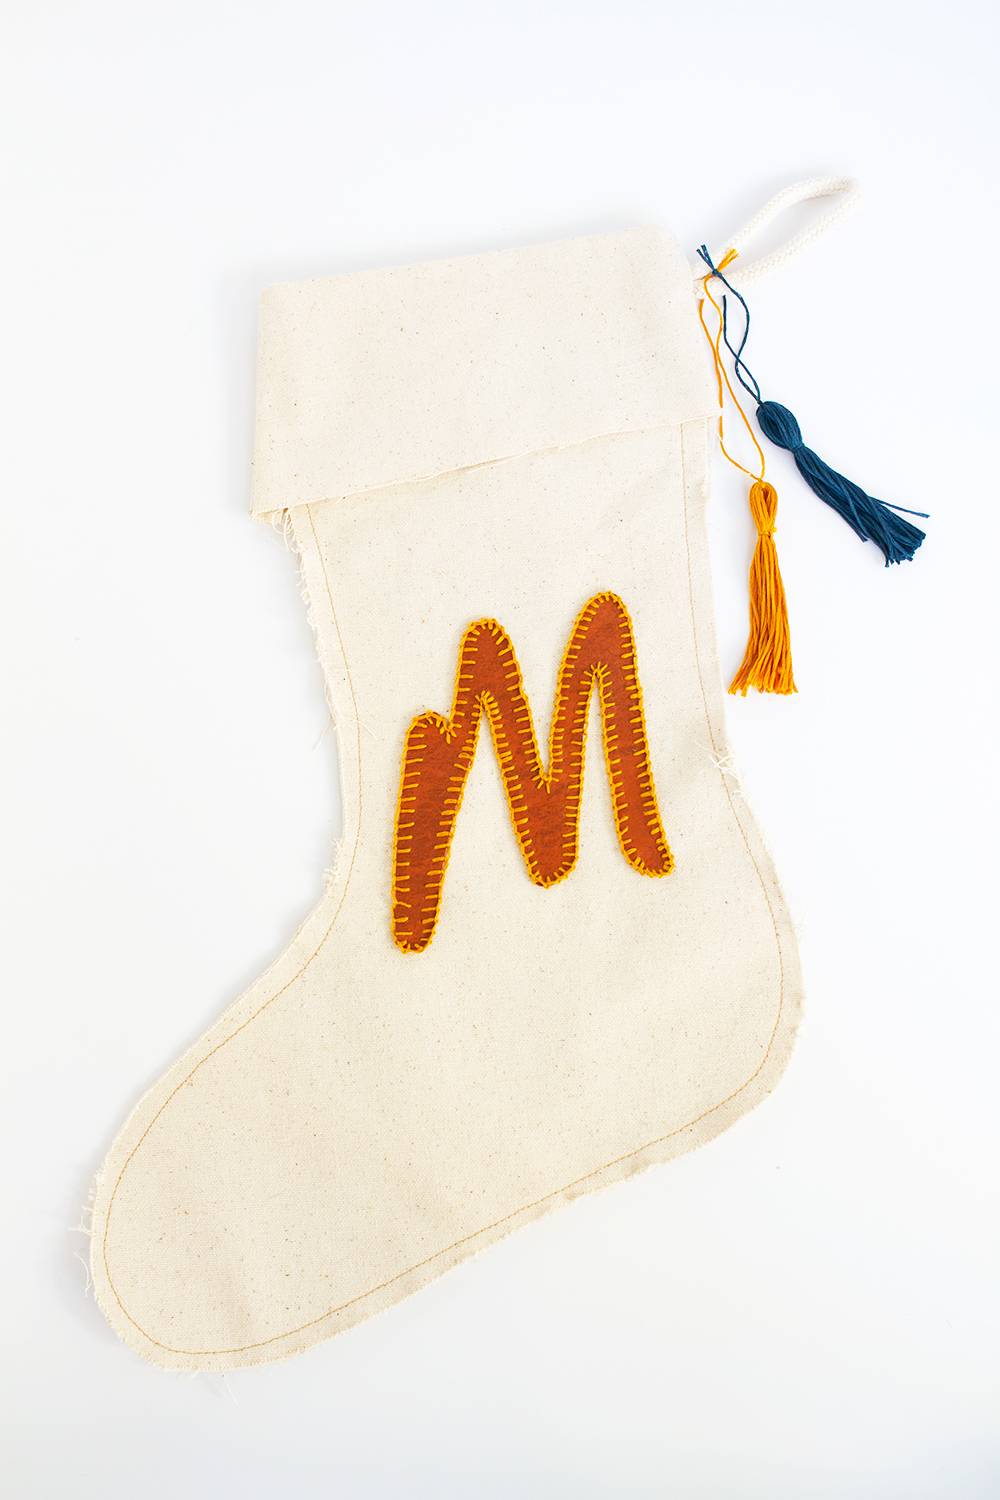 A natural colored stocking with the letter M in orange.